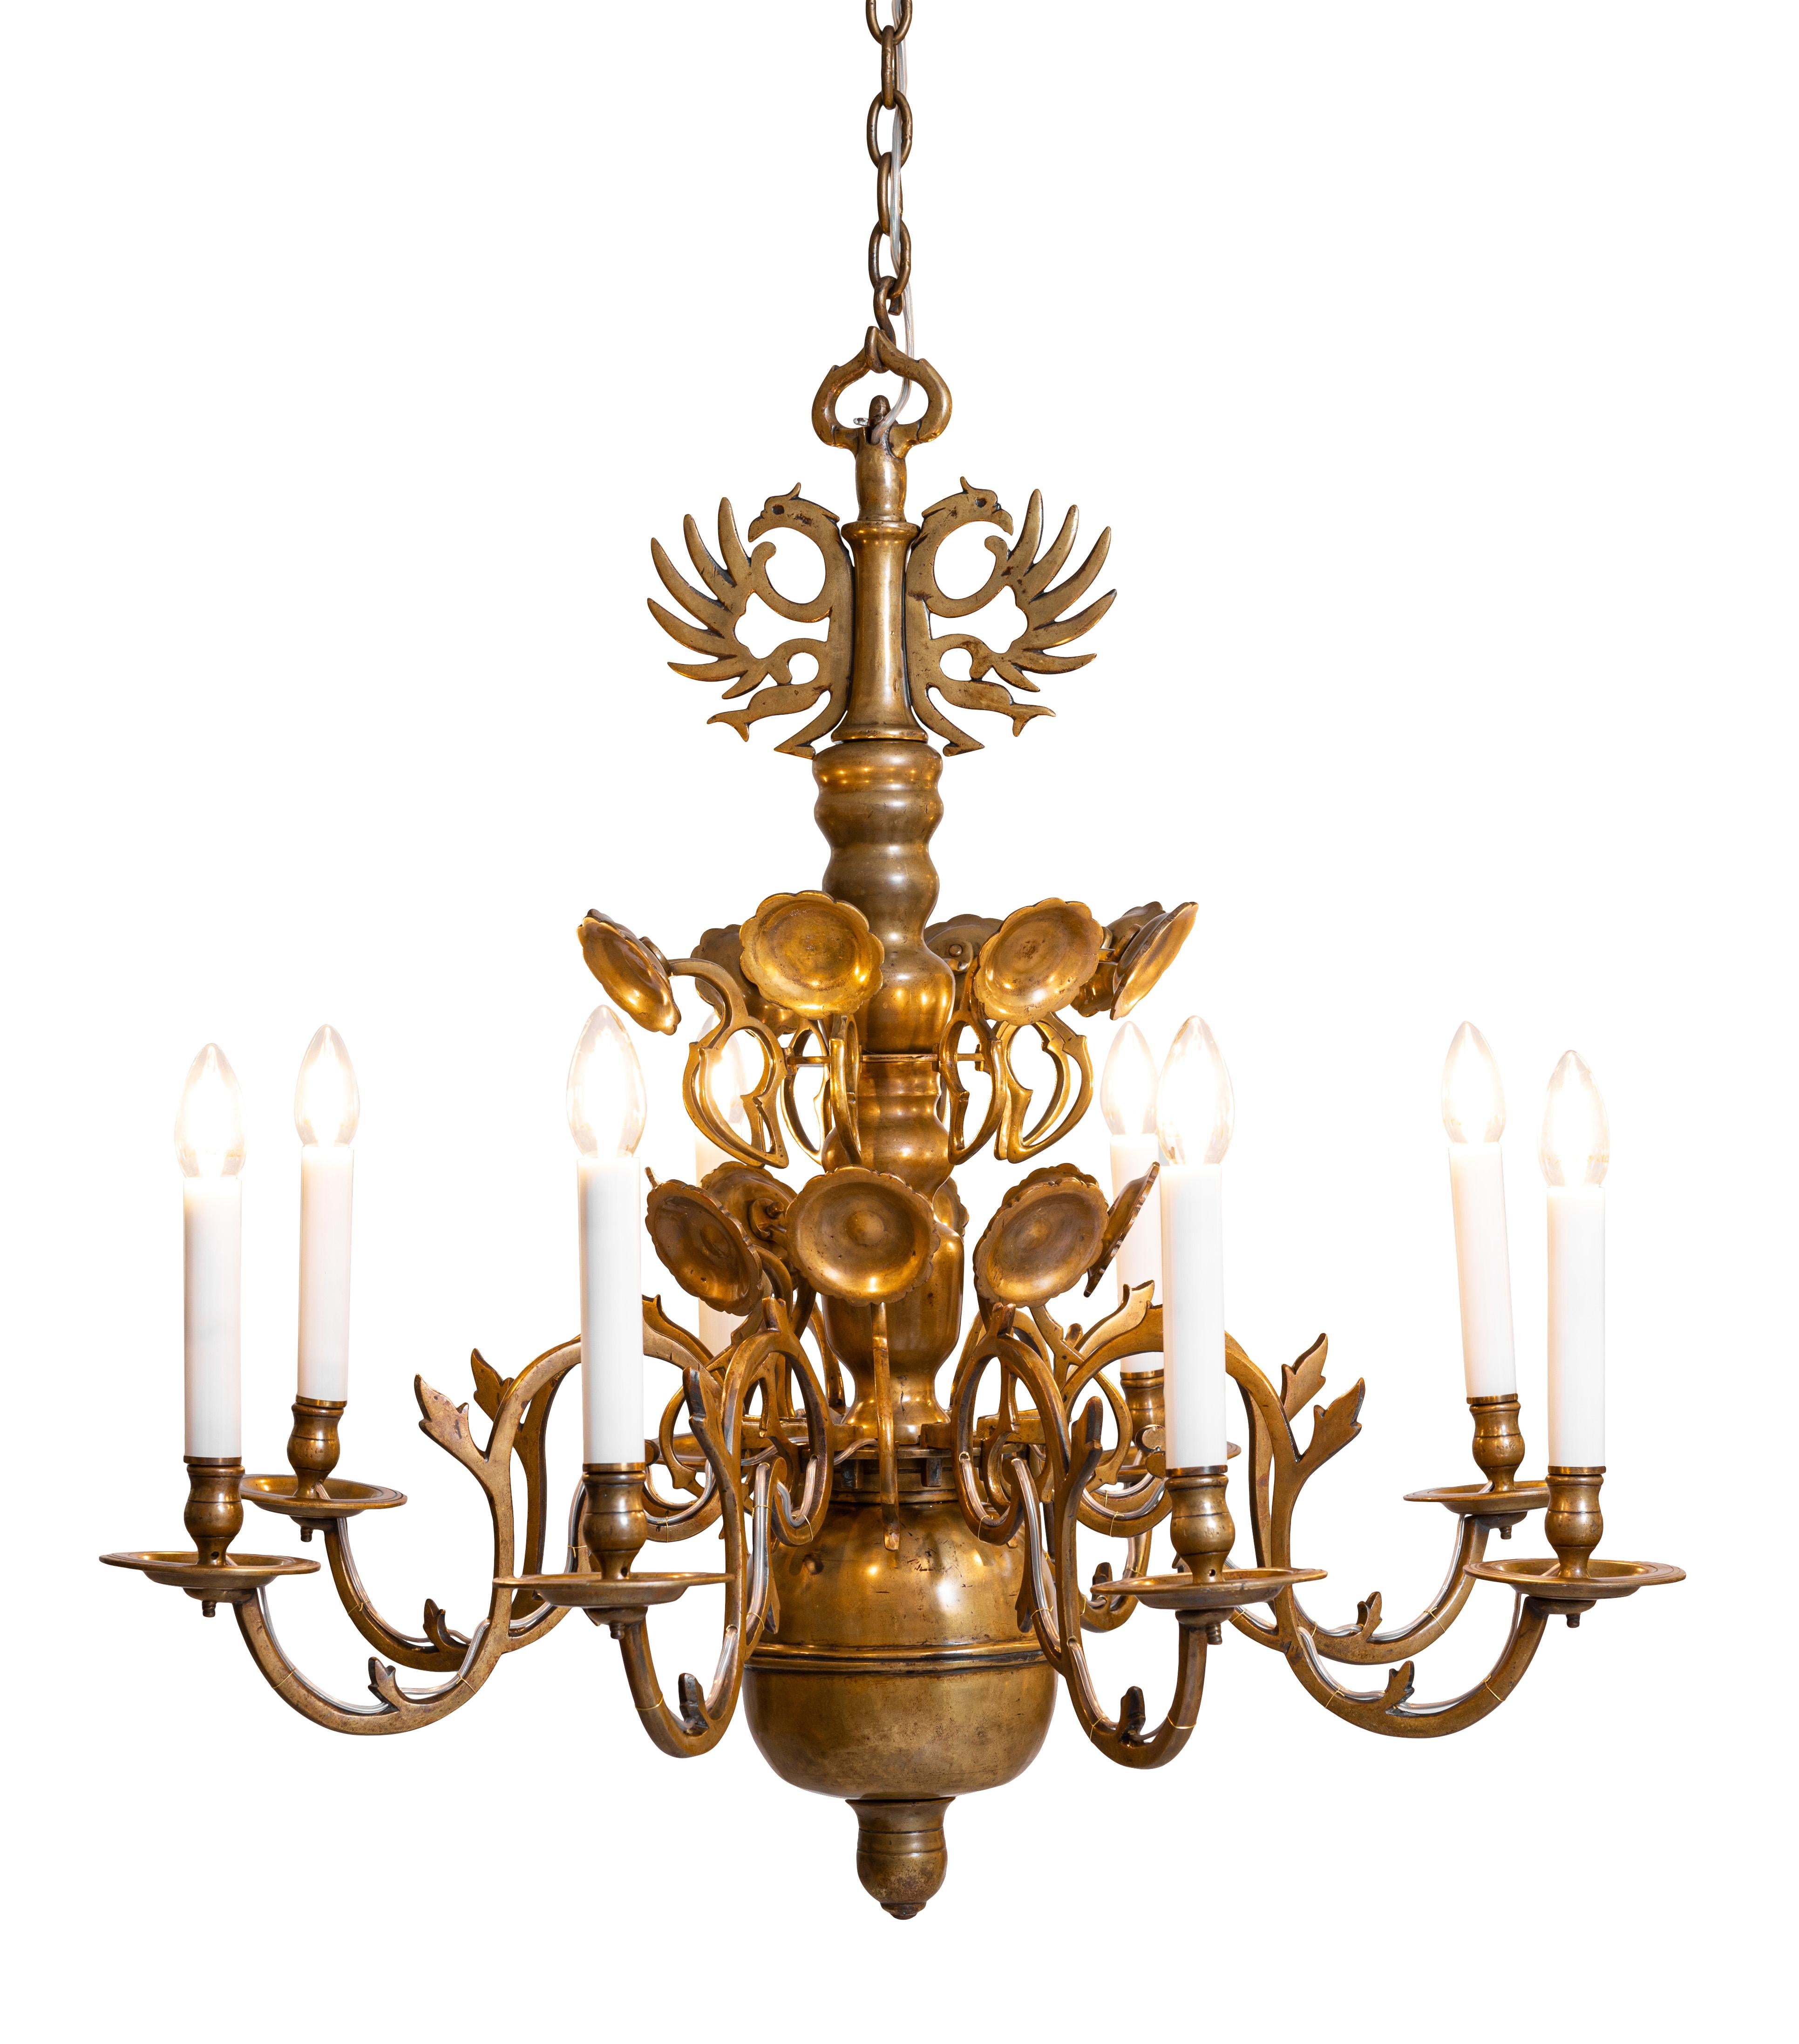 Polish baroque chandelier from the 18th century, originally for wax candles, electrified end of 19th century. Brass-body in baluster-form with pluged in blossoms, voluted arms and eagletop. Please notice the handcut screws and the varied casting and